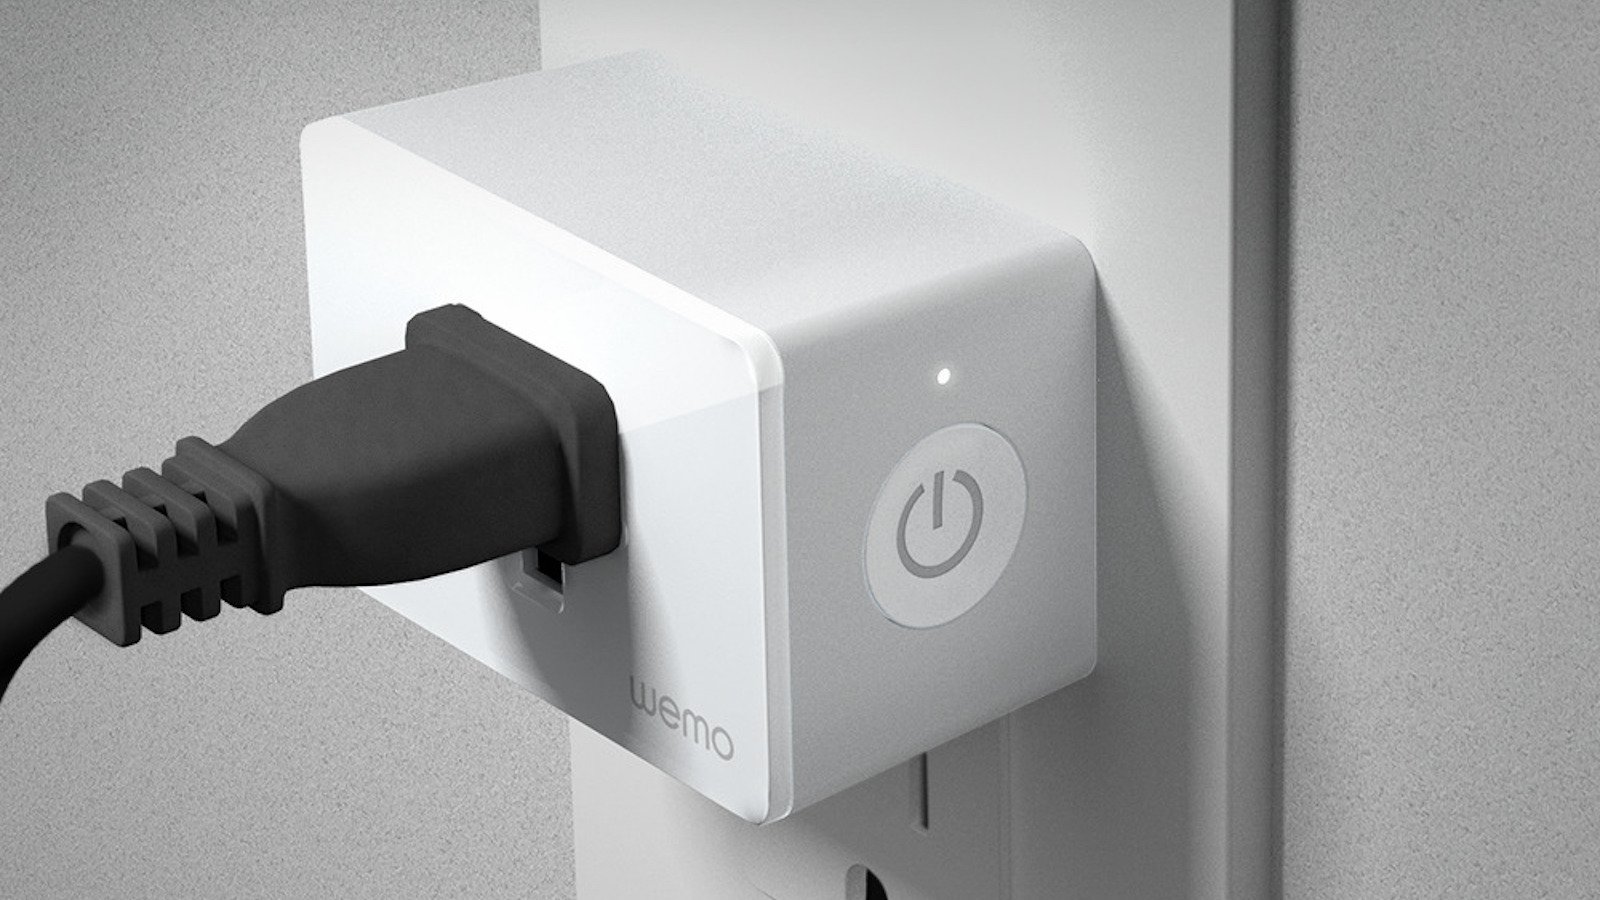 Wemo WiFi Smart Plug Compact Outlet lets you control your home from anywhere